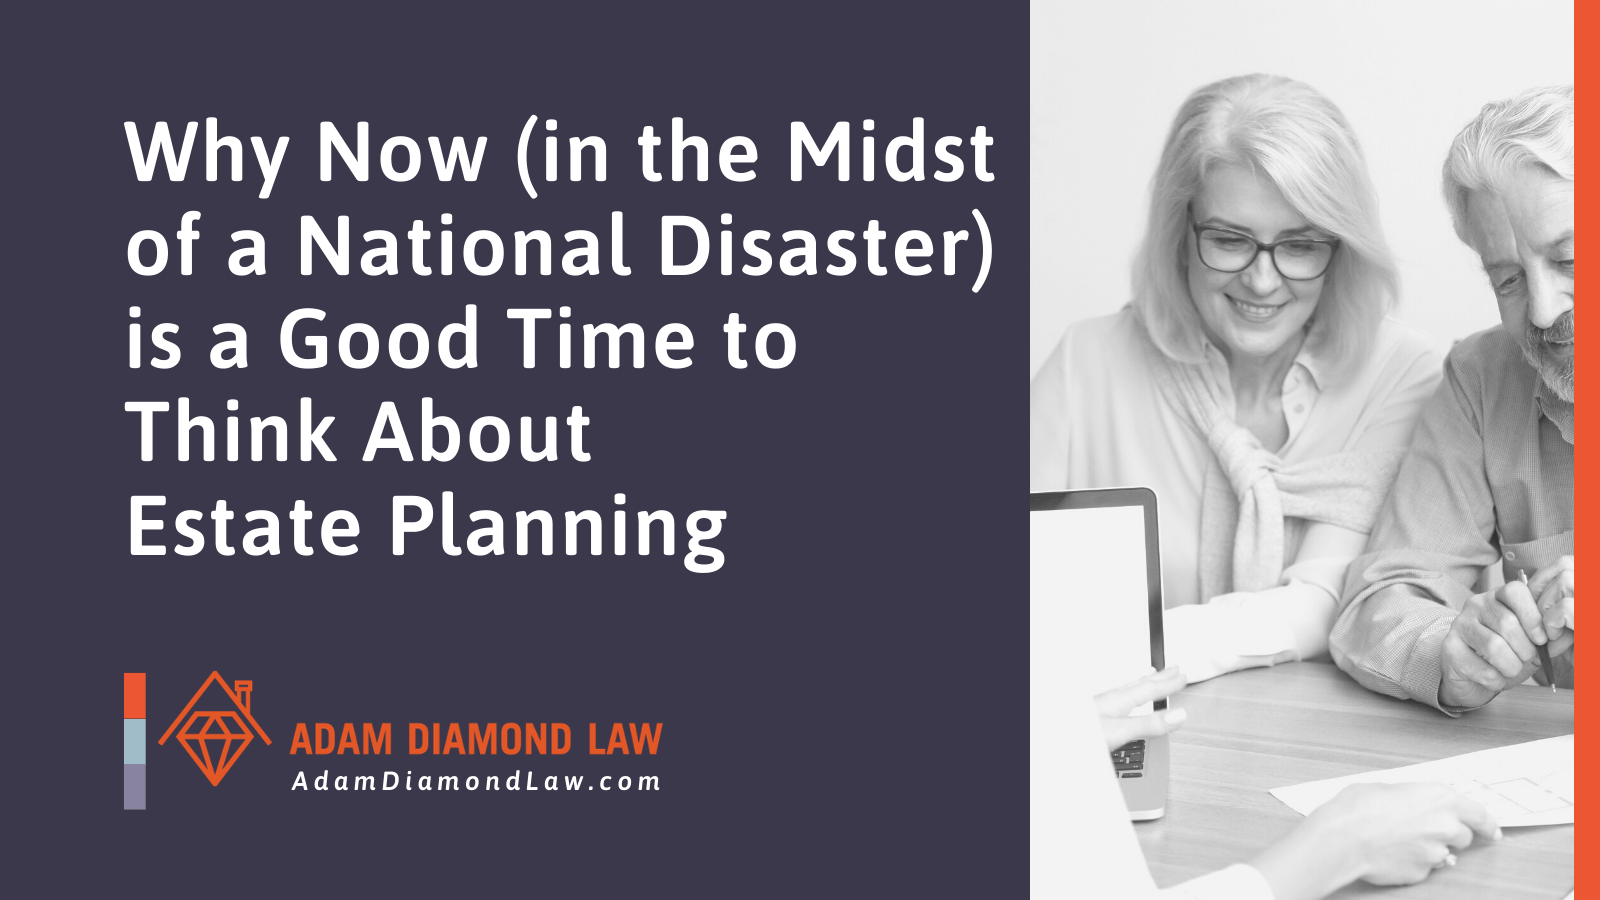 Why Now (in the Midst of a National Disaster) is a Good Time to Think About Estate Planning - Adam Diamond Law | McHenry, IL Residential Real Estate Lawyer